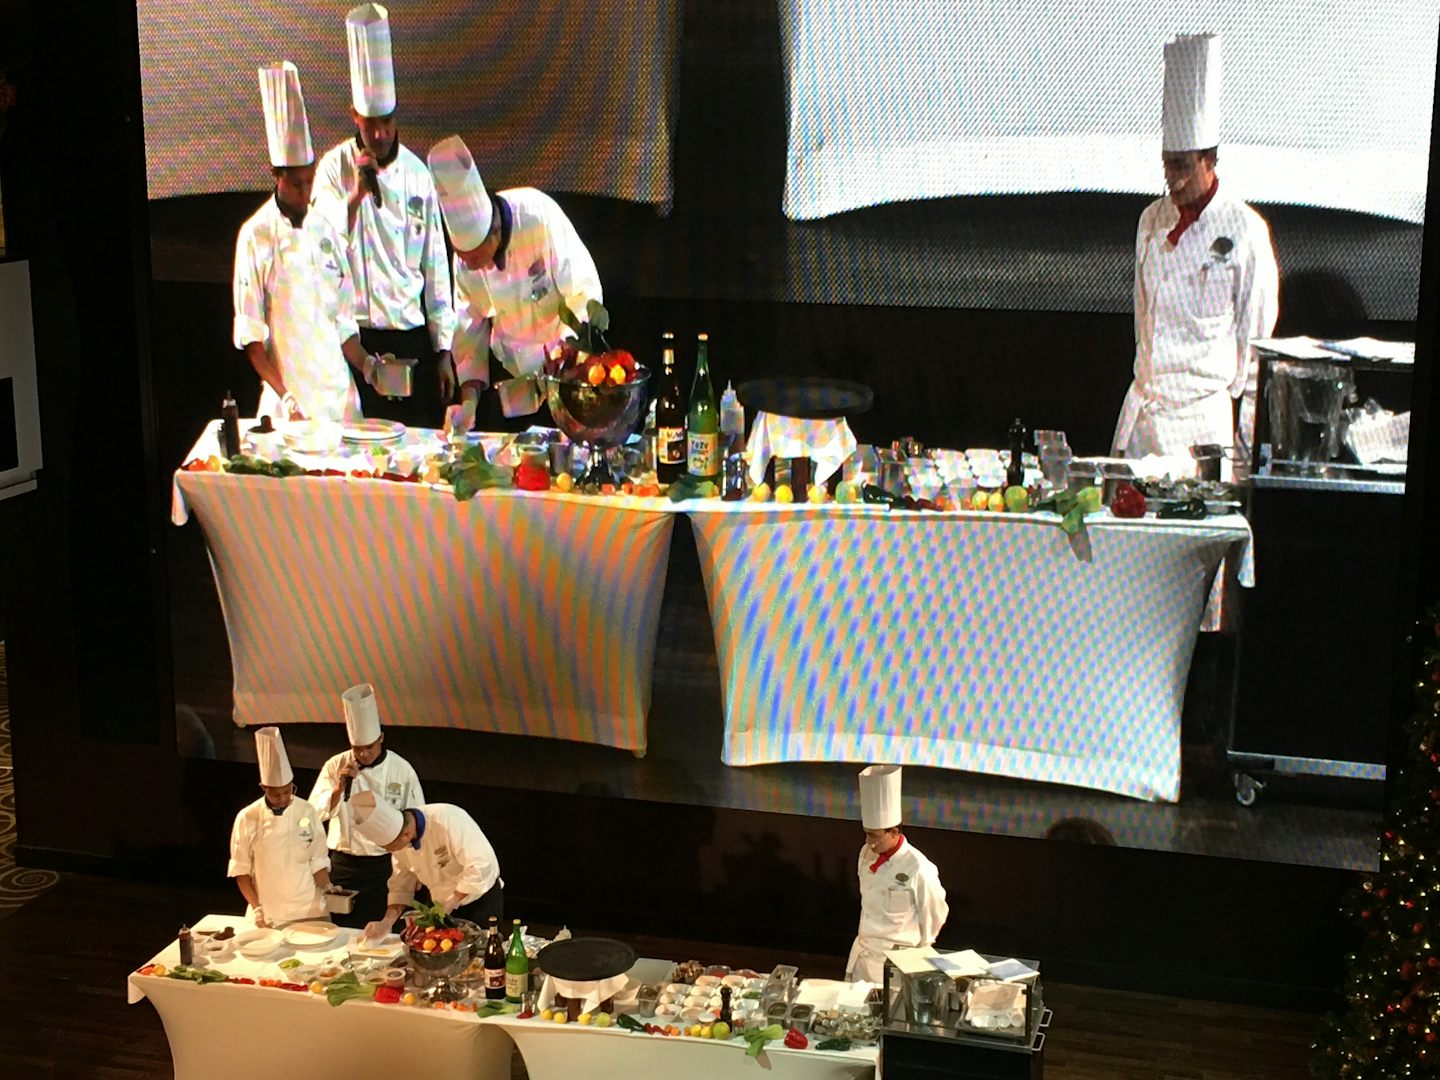 A demonstration in the Atruim Lounge by the Ocean Blue restaurant chefs. I